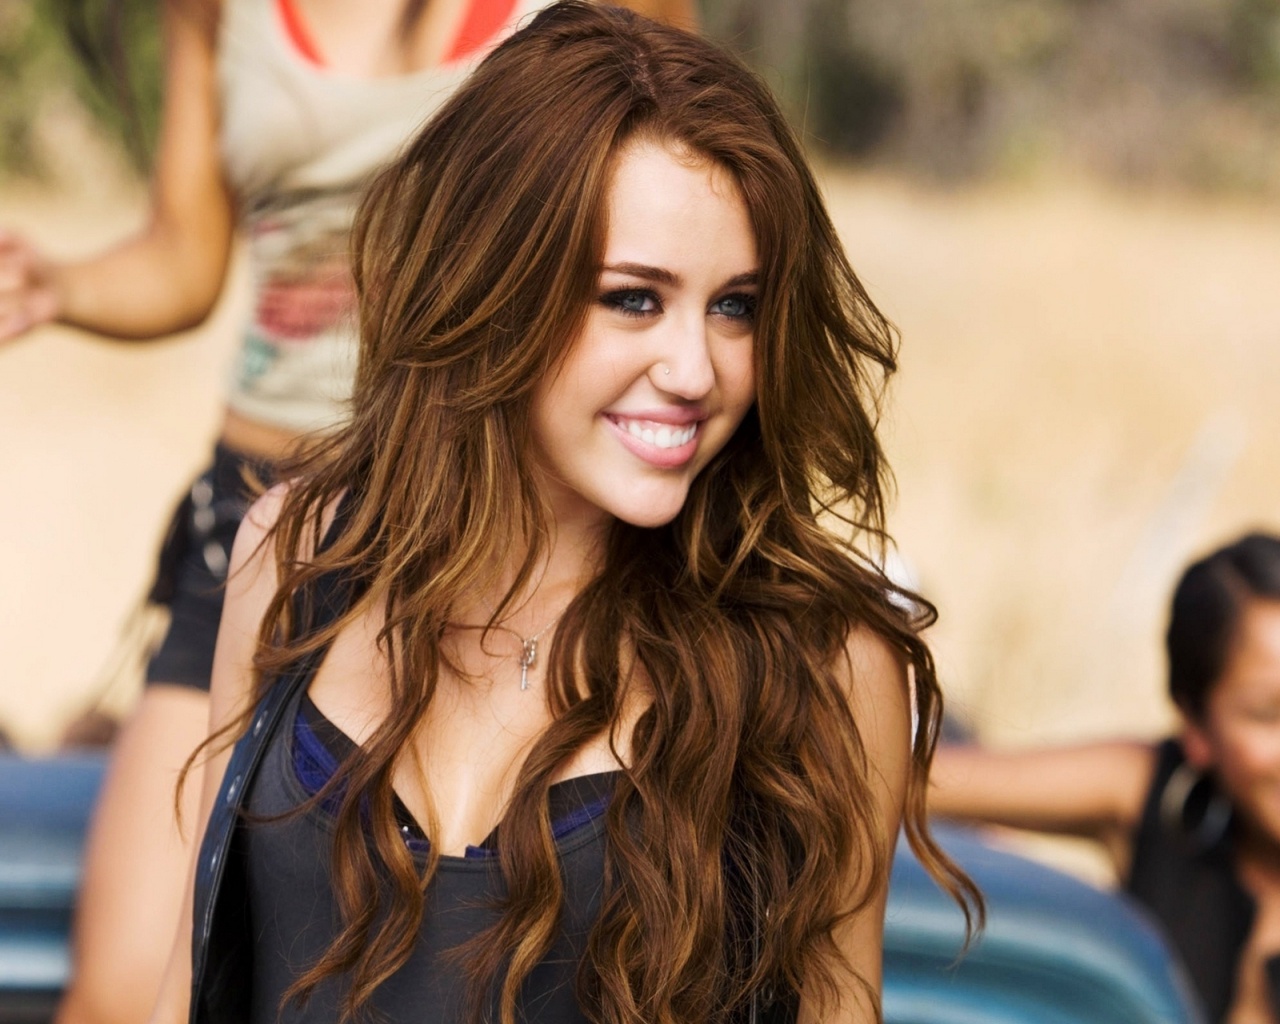 miley cyrus images hd A36